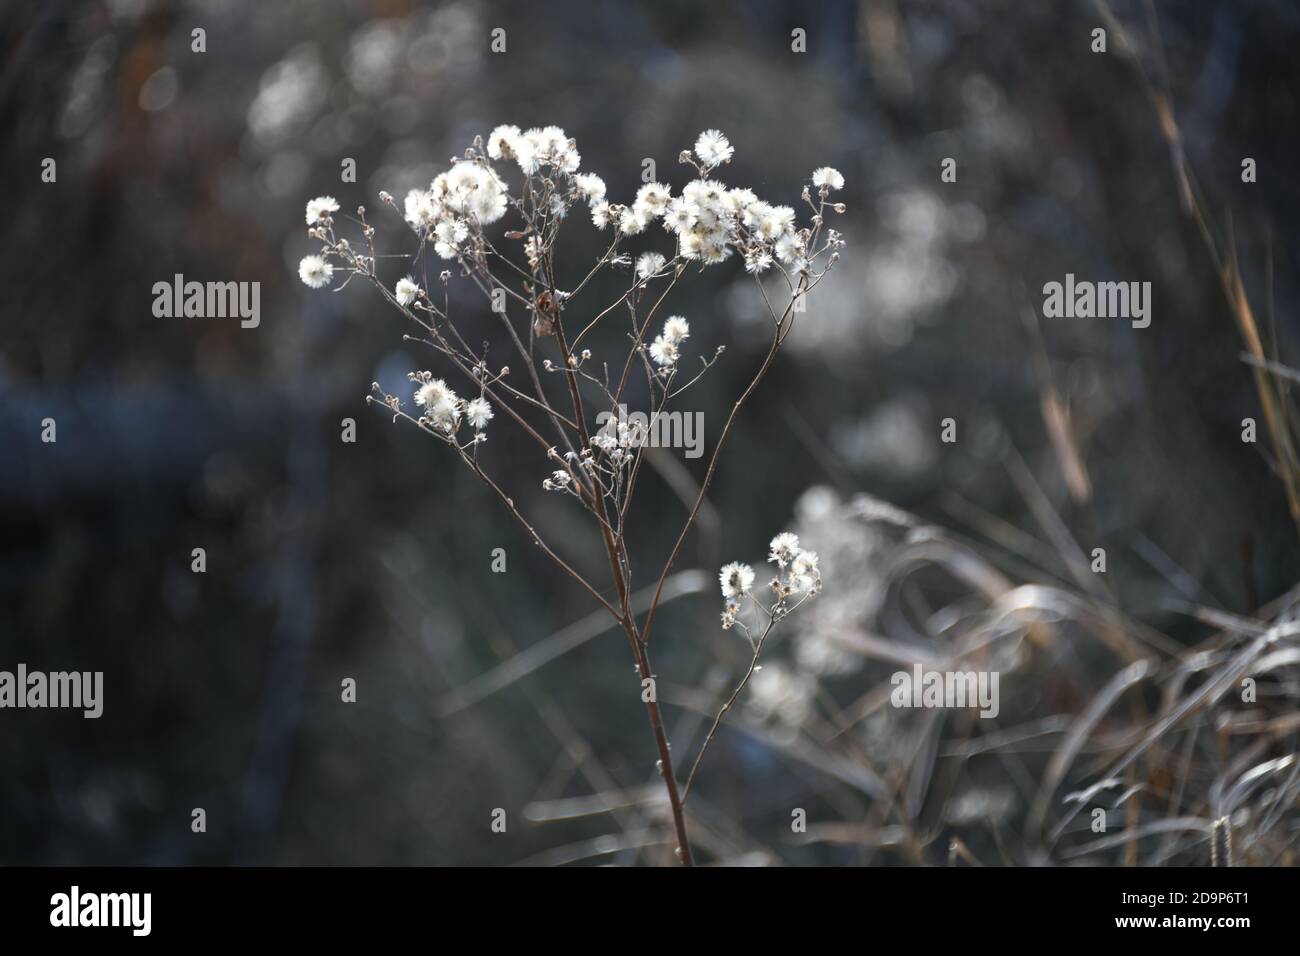 Dry white flowers caught in the suns rays by Mission Marsh, Thunder Bay, Northwestern Ontario, Canada, North America. Stock Photo